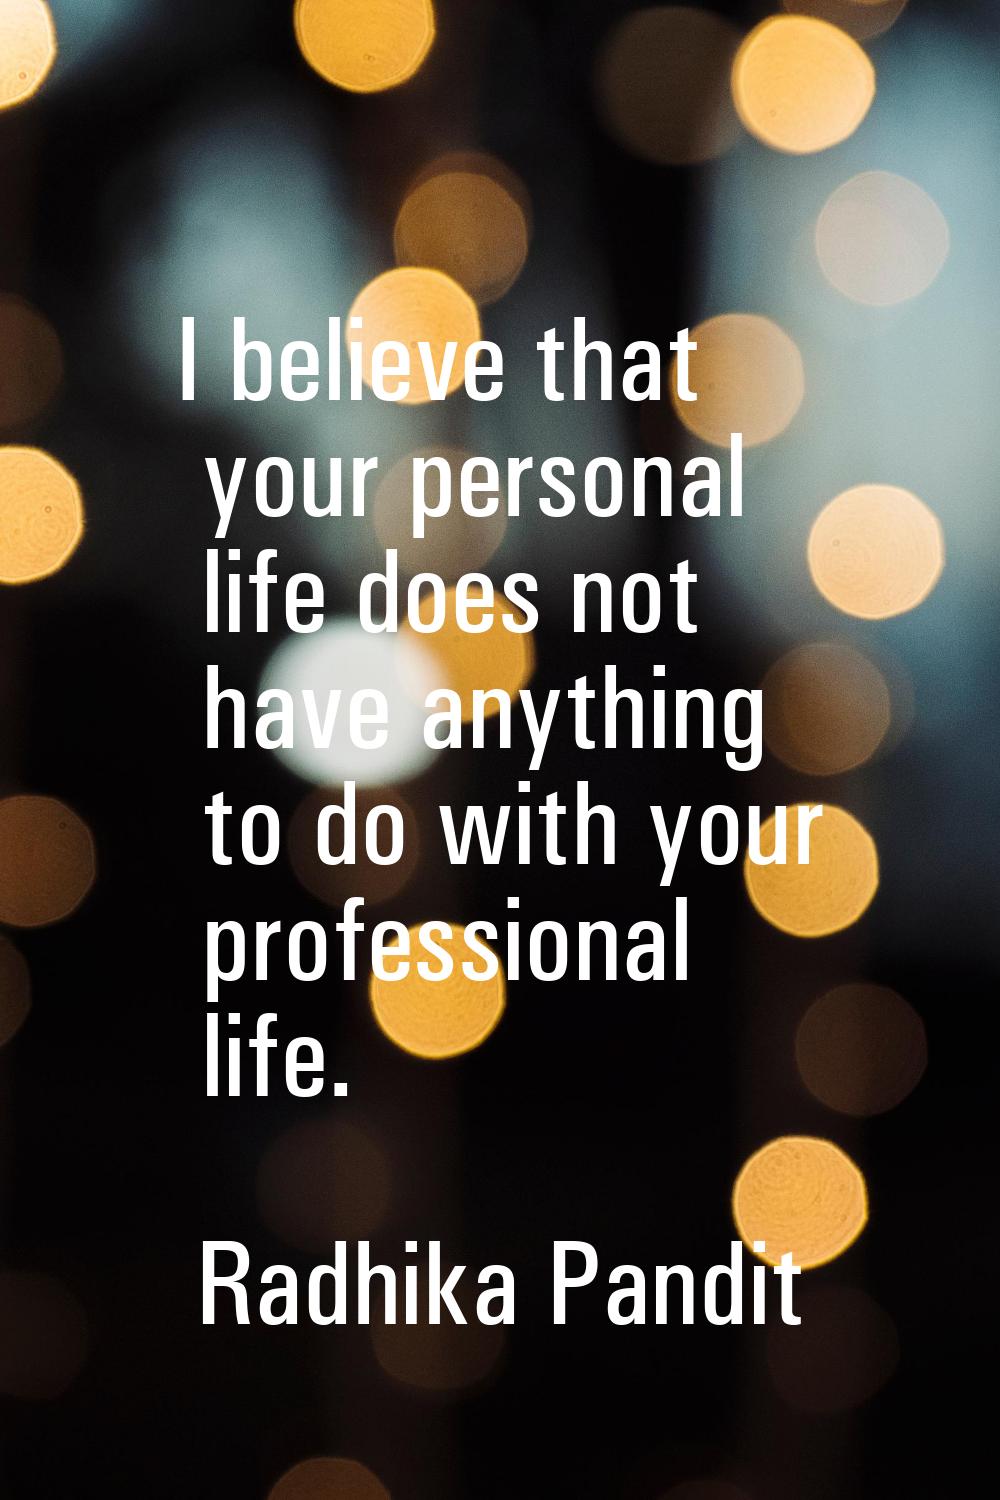 I believe that your personal life does not have anything to do with your professional life.